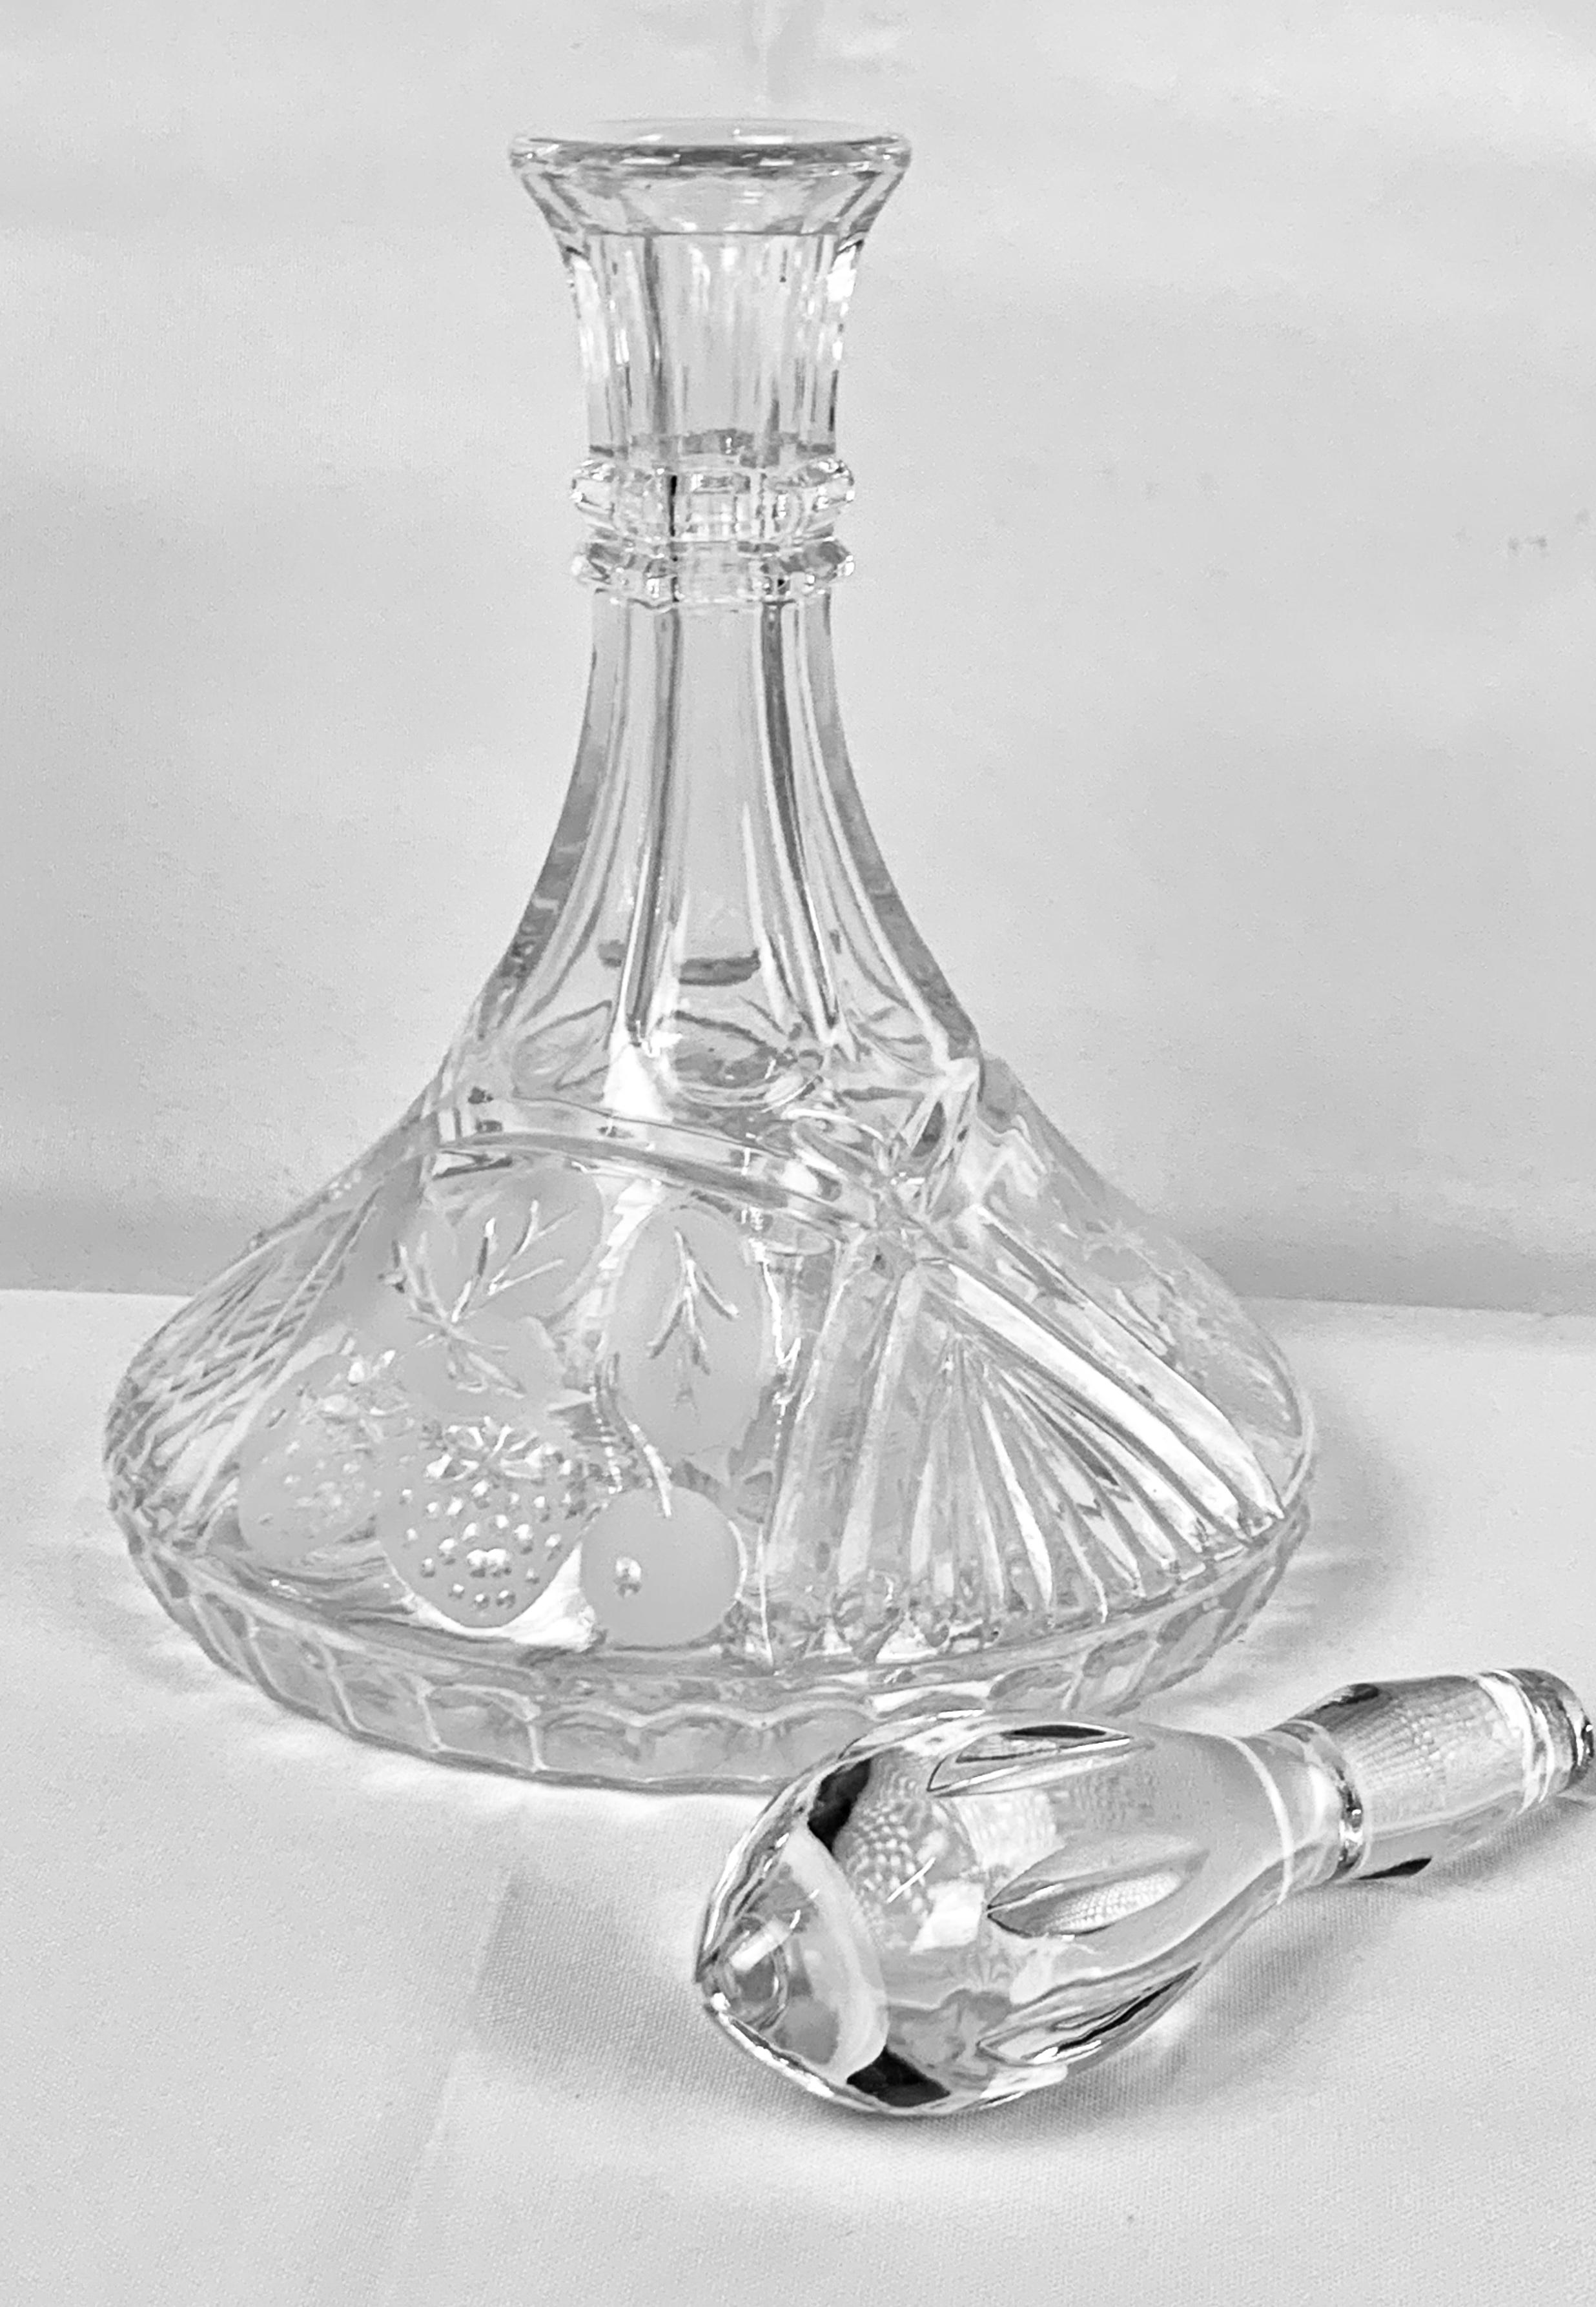 Handsome vintage decanter with etched strawberries and leaves on the base. The stopper is very clear and heavy. There are two grip rings at the top of the neck to prevent slipping. This decanter looks like it sat in a cabinet and never got used. It